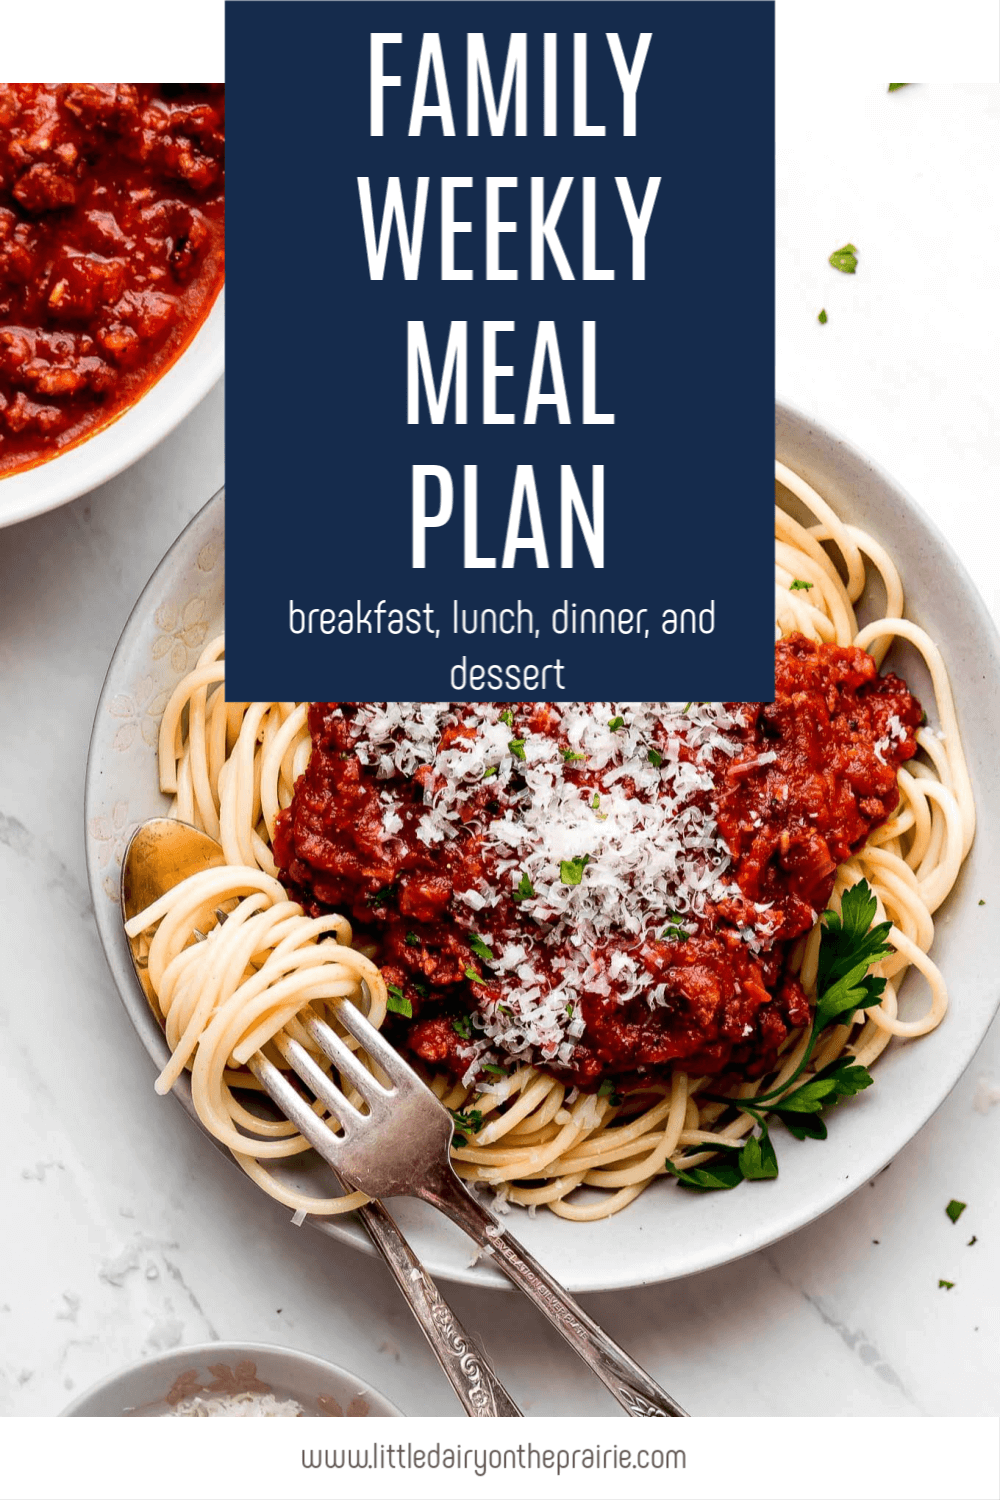 an image of spaghetti noodles with marinara sauce and a graphic overlay with text